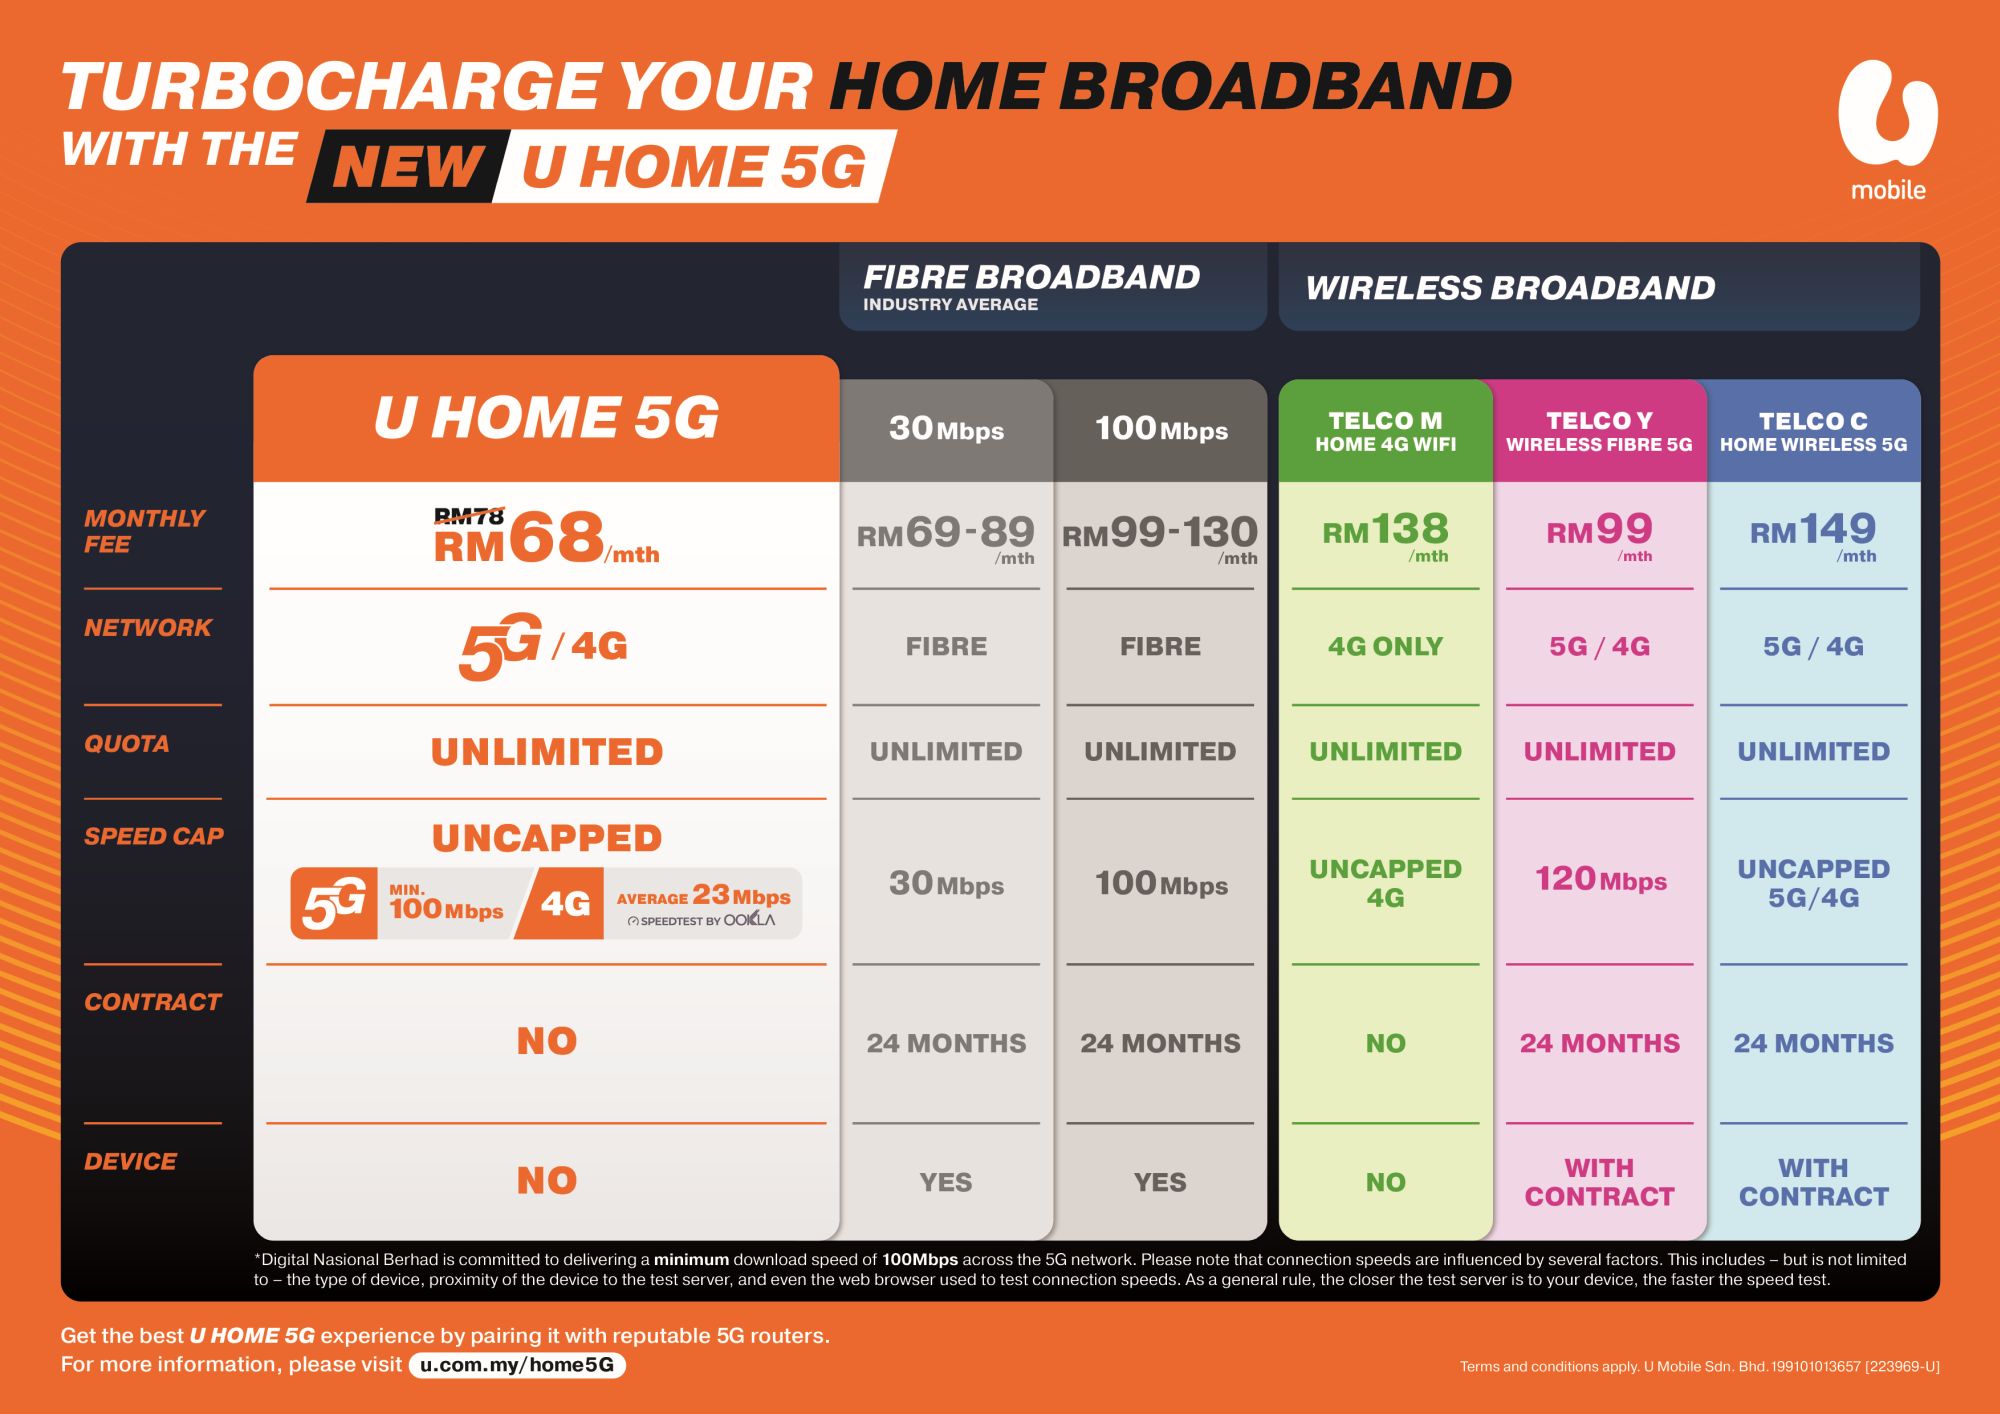 Home 5G: U Mobile offers unlimited 5G wireless with no and speed cap for RM68/month